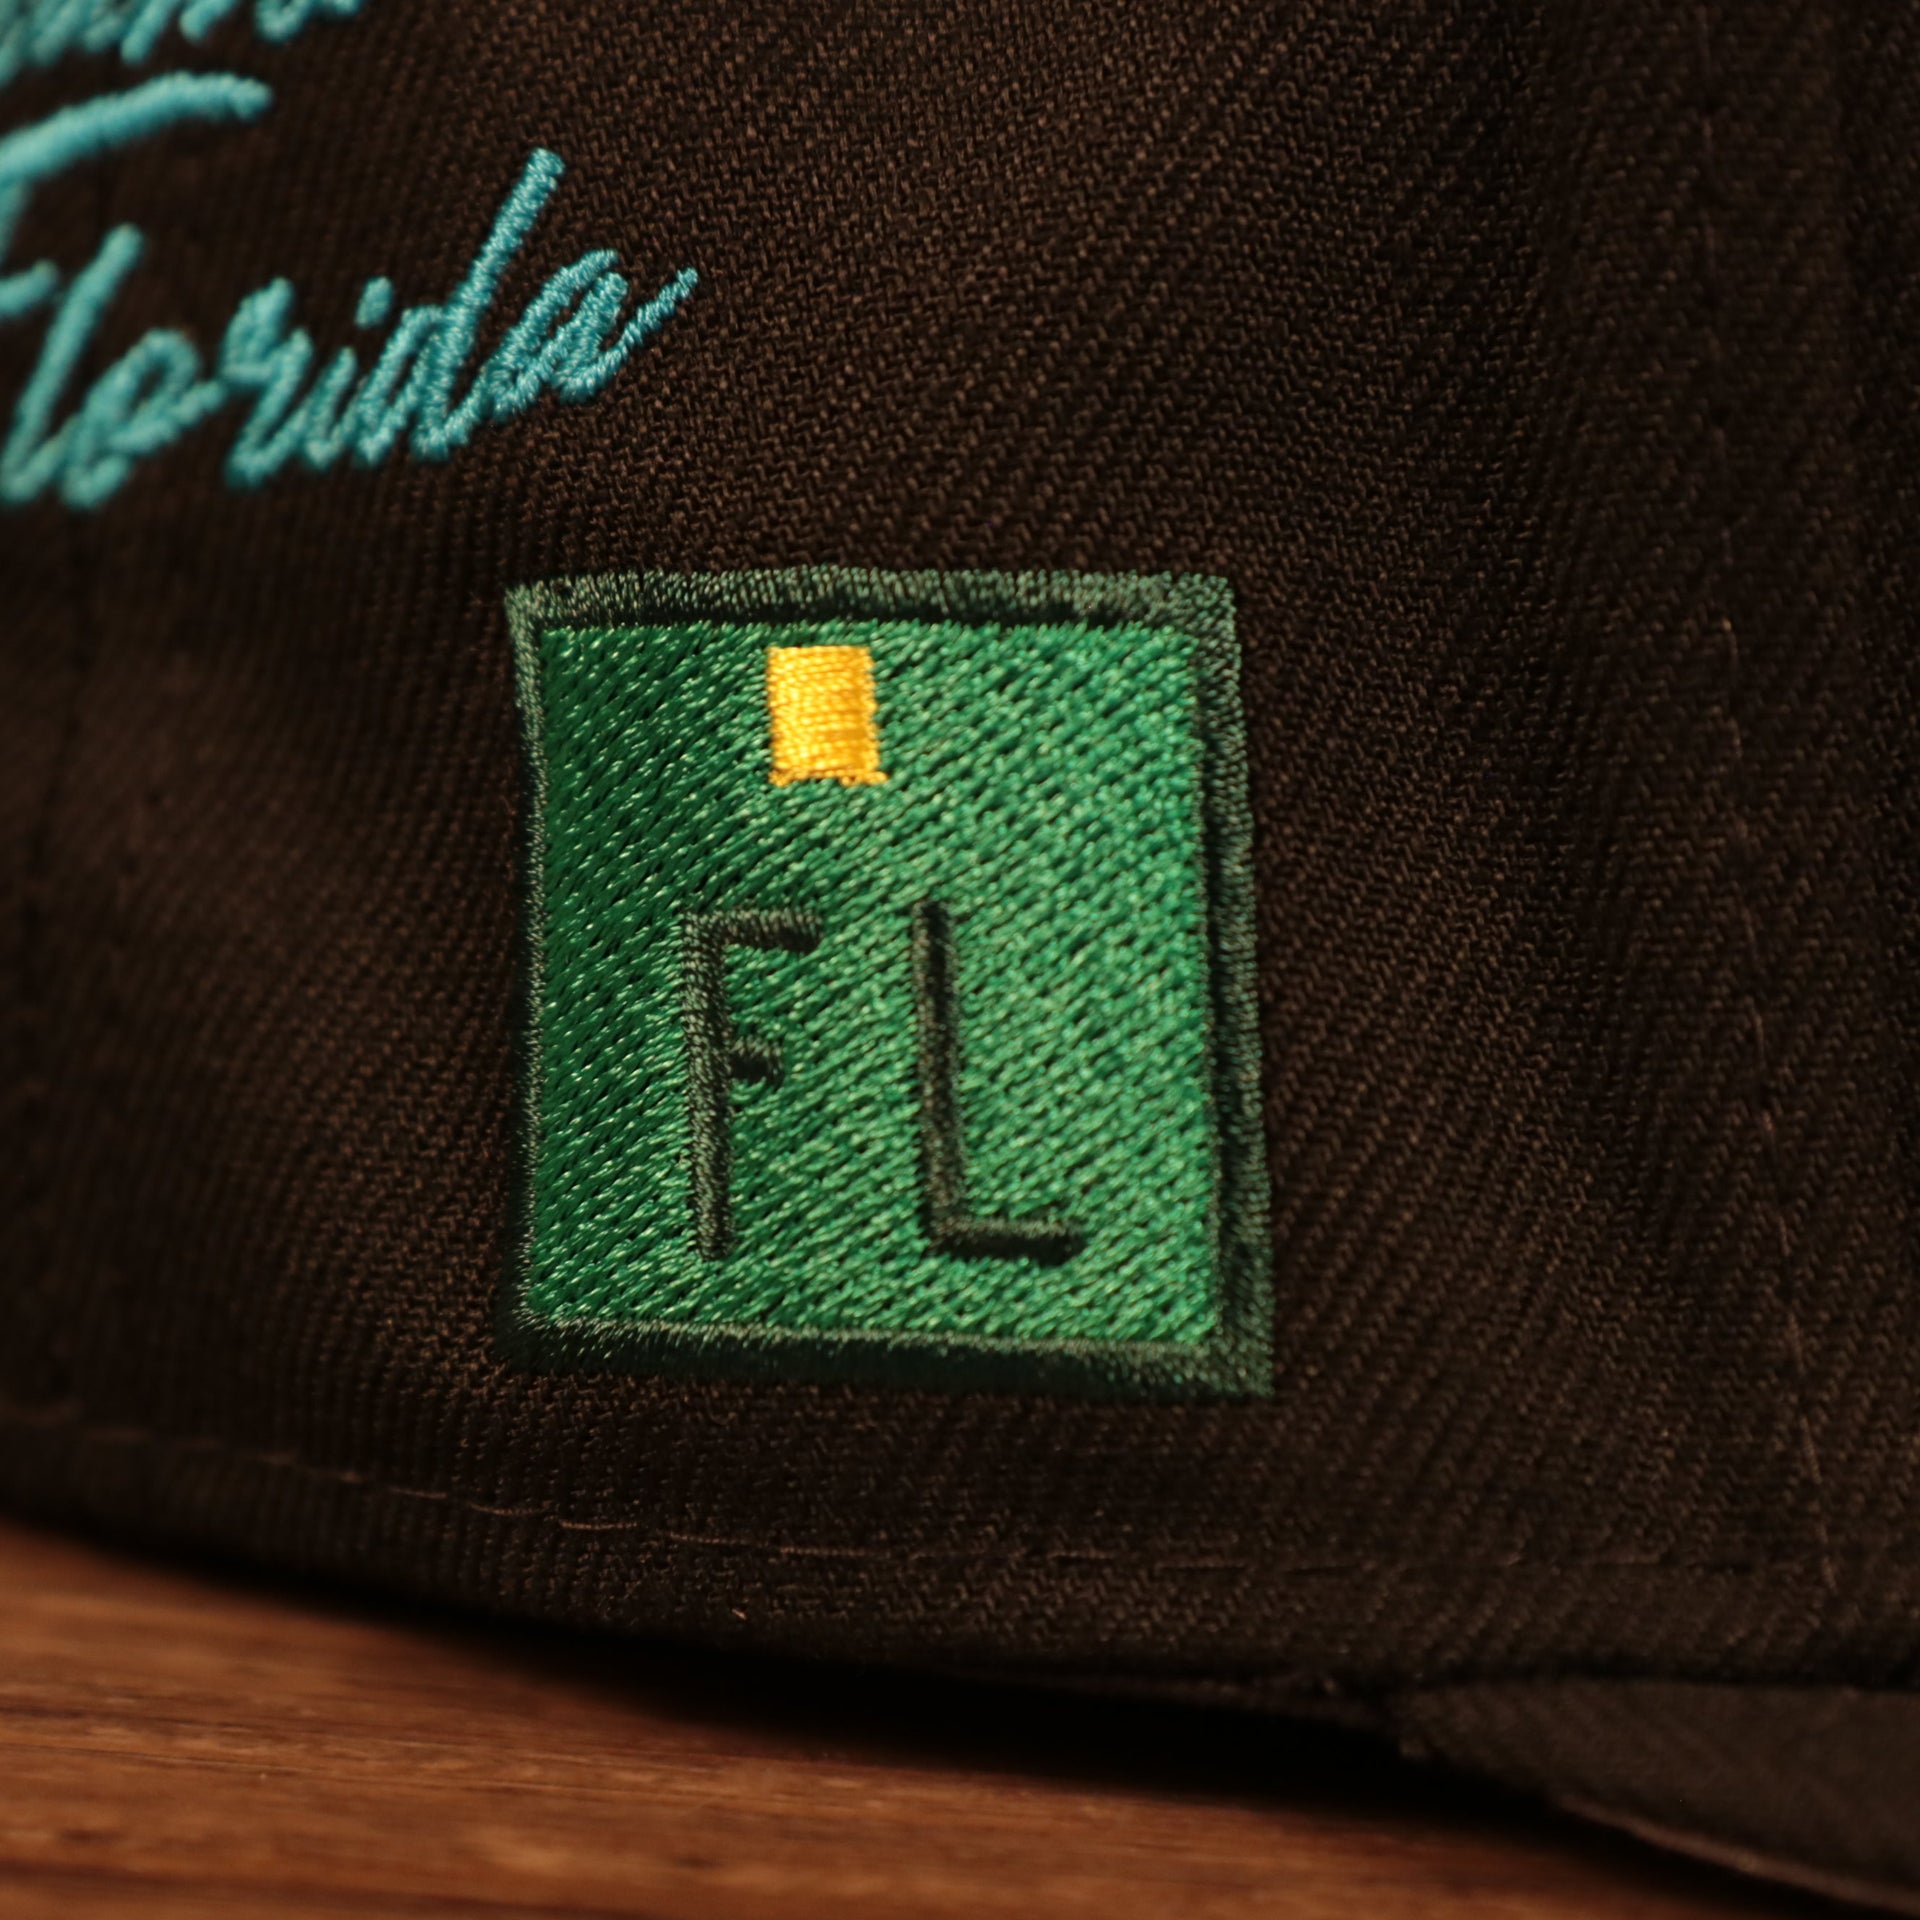 Close up of the FL sign on the Florida Marlins Cooperstown City Transit All Over Side Patch Gray Bottom 59Fifty Fitted Cap